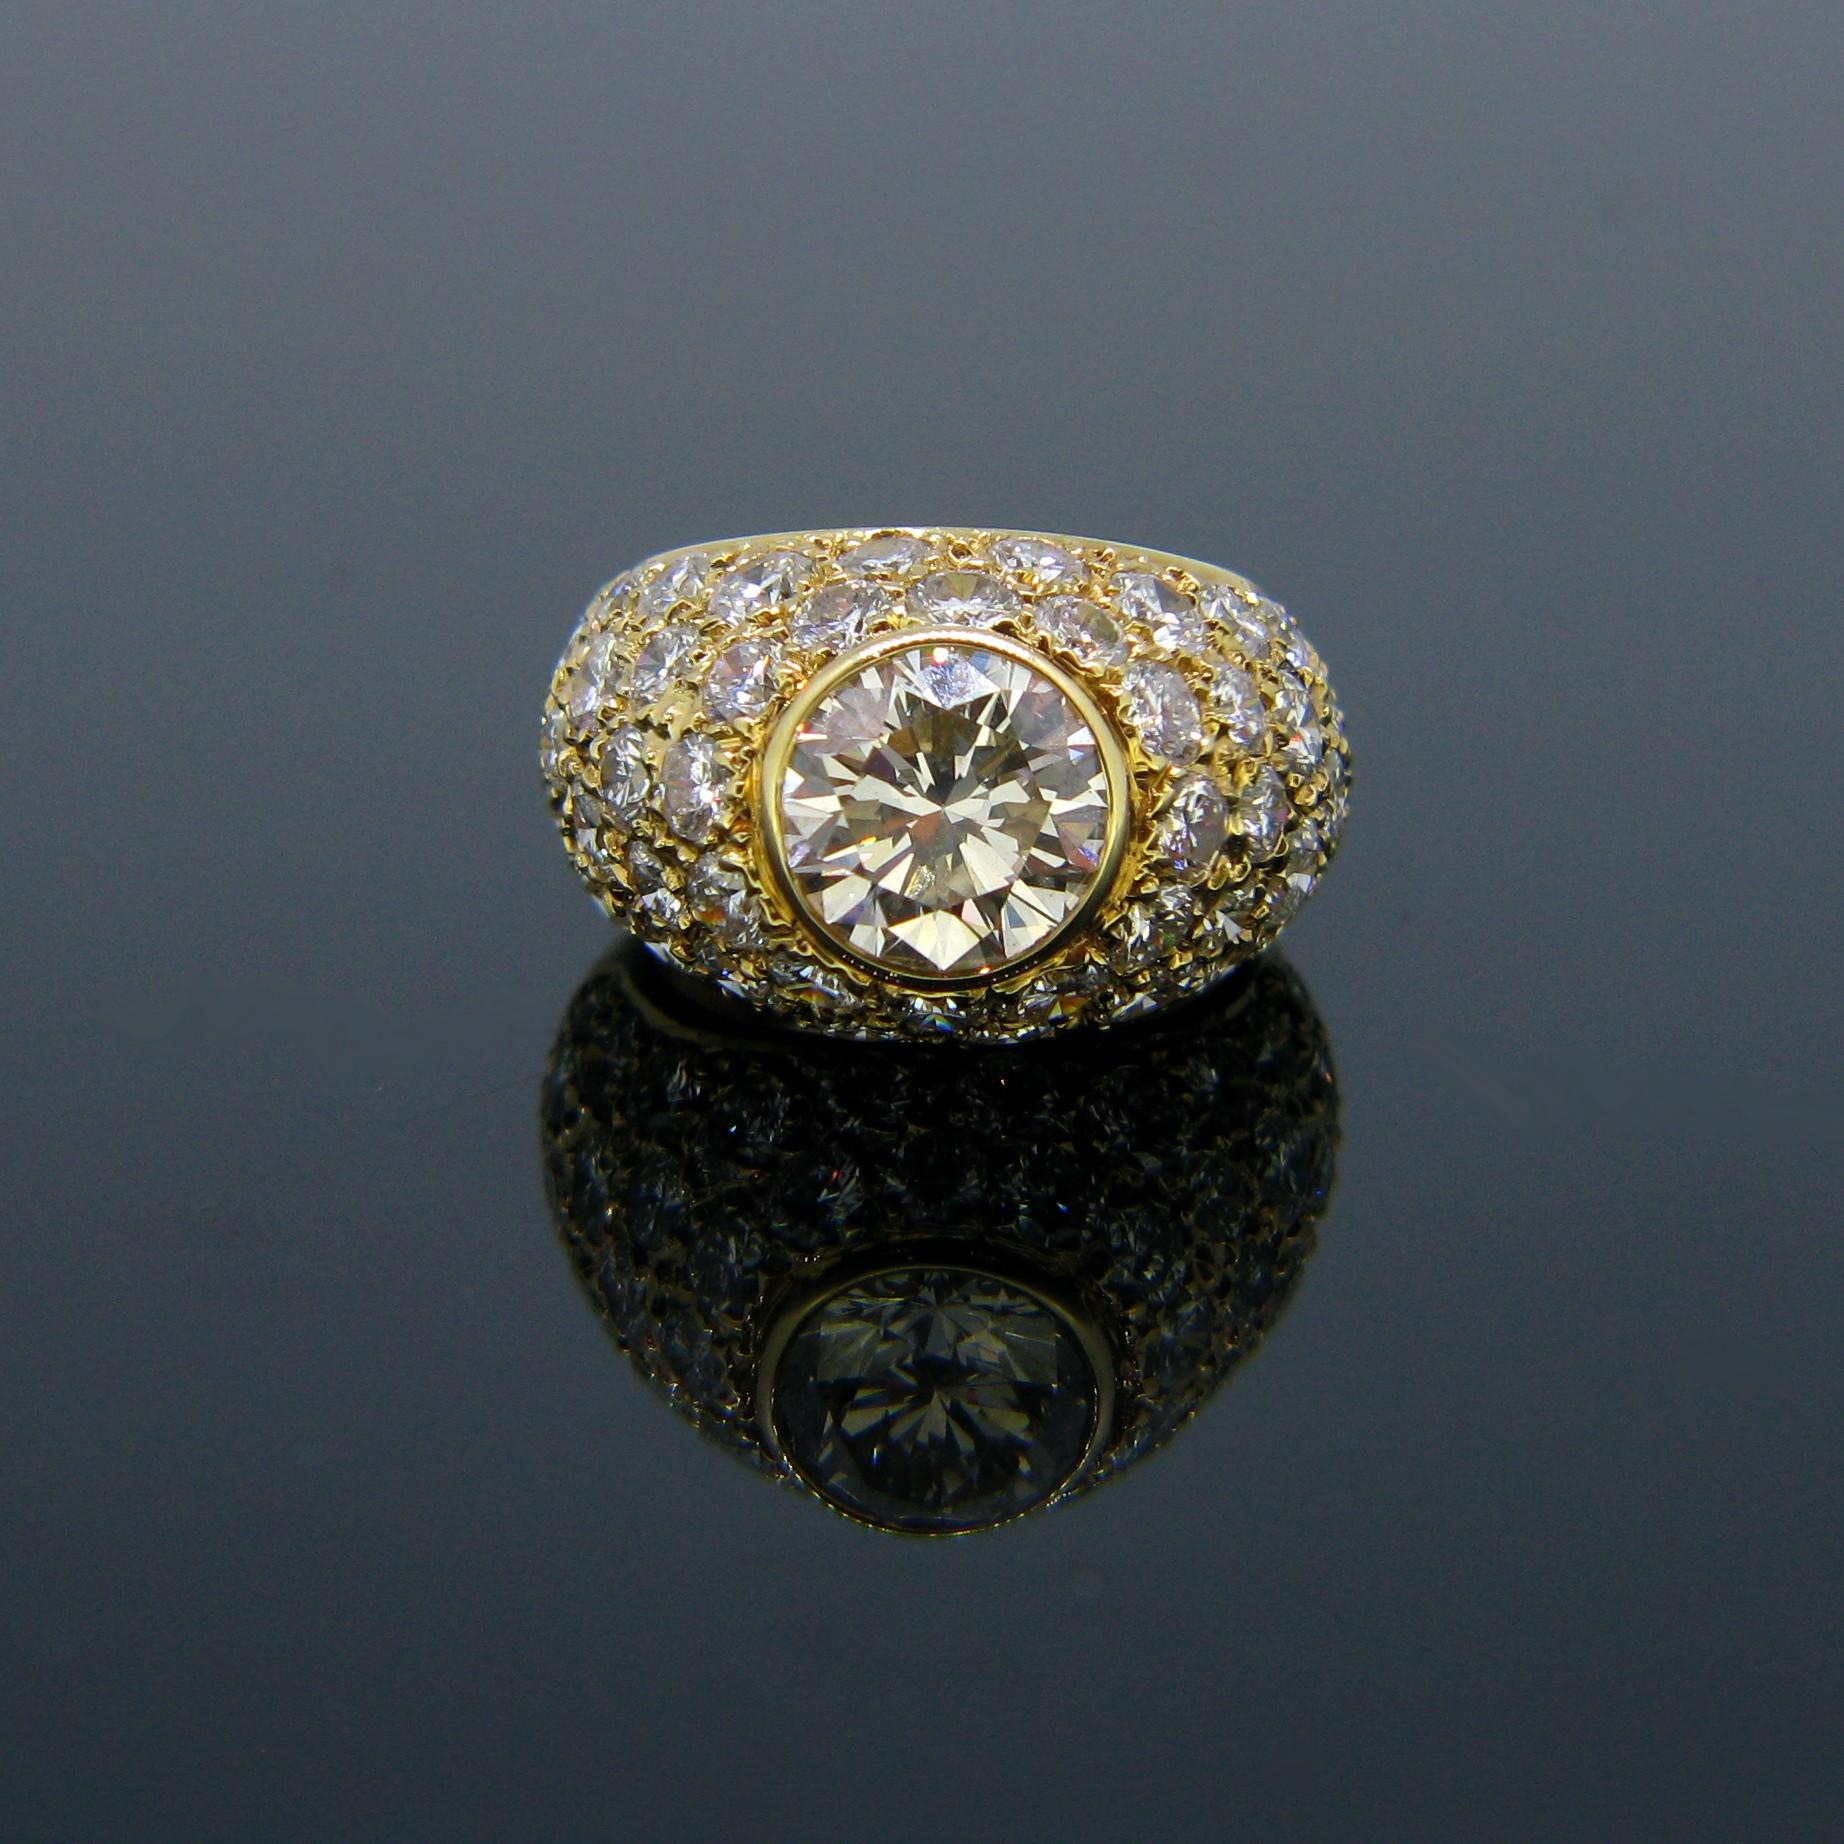 This beautiful diamond ring is set with a brilliant cut of 1.85ct approximately and paved with 56 diamonds. The total diamond carat weight on this ring is over 5ct. The band is made in 18kt yellow gold.

Weight:	10.71gr

Metal:		18kt Yellow